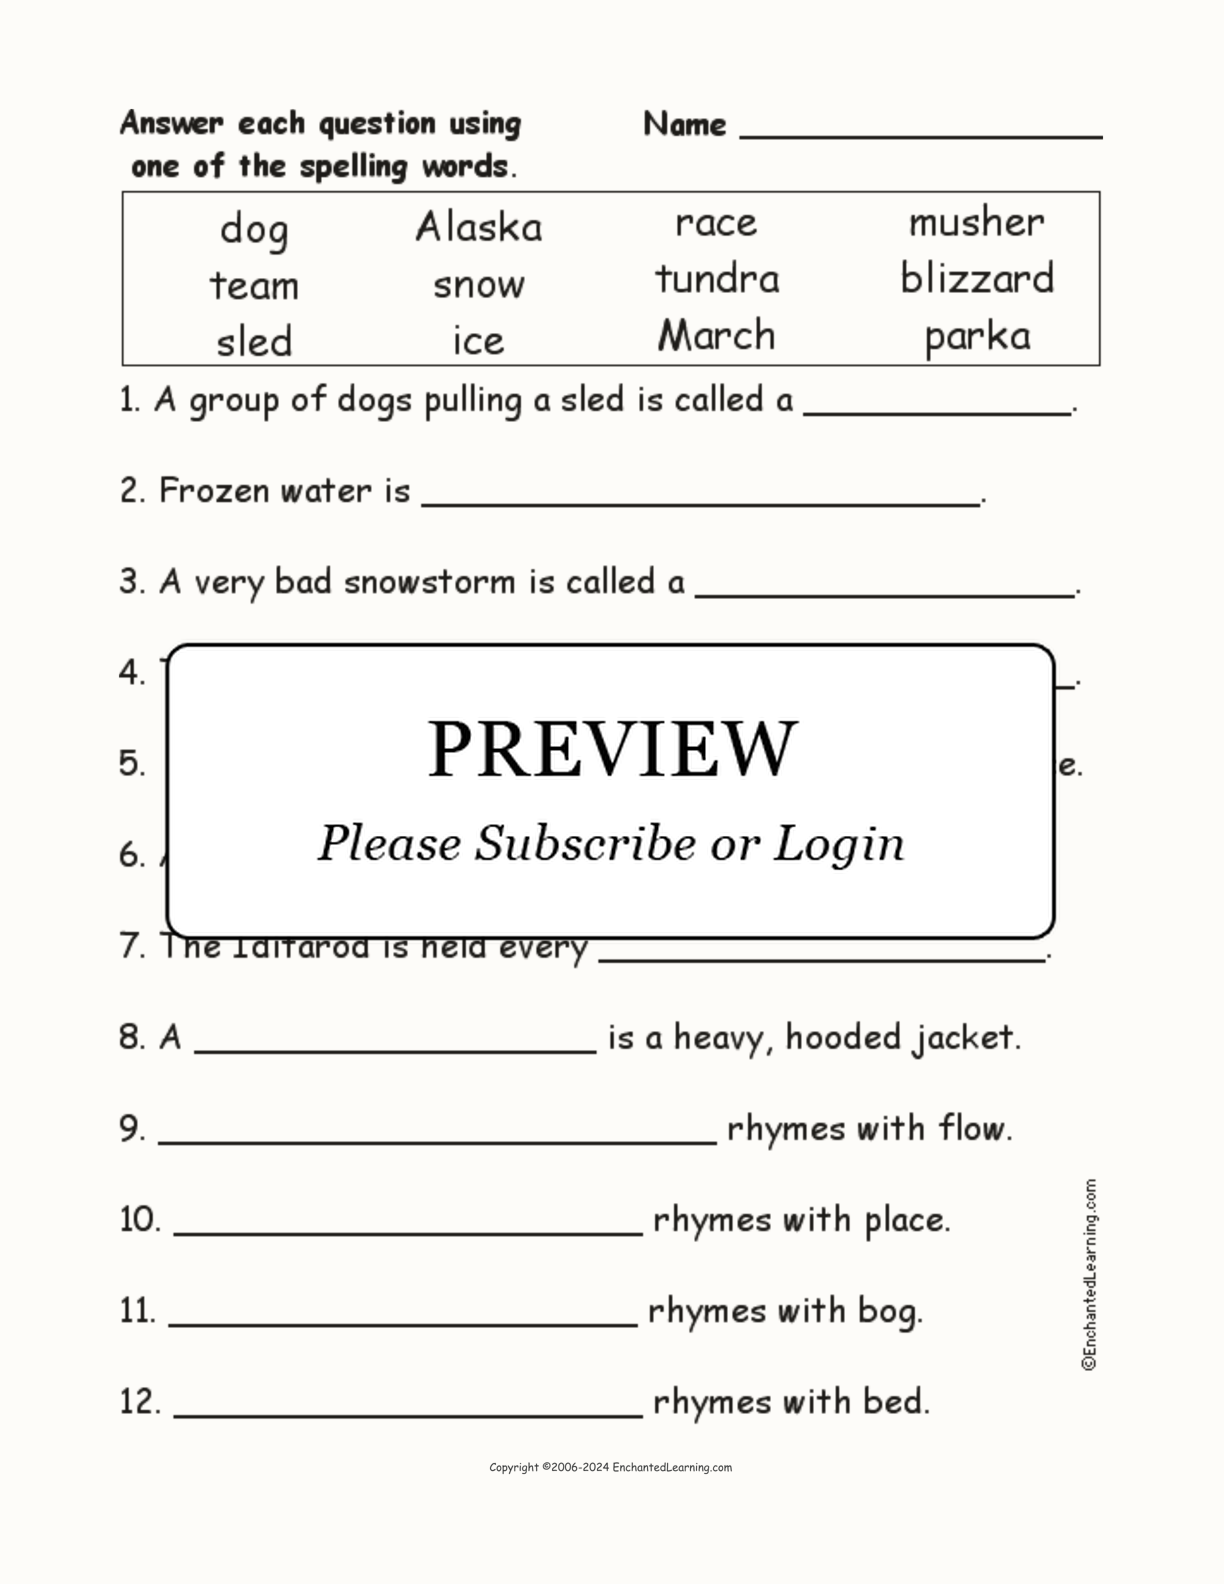 Iditarod Dog Sled Race: Spelling Questions interactive worksheet page 1